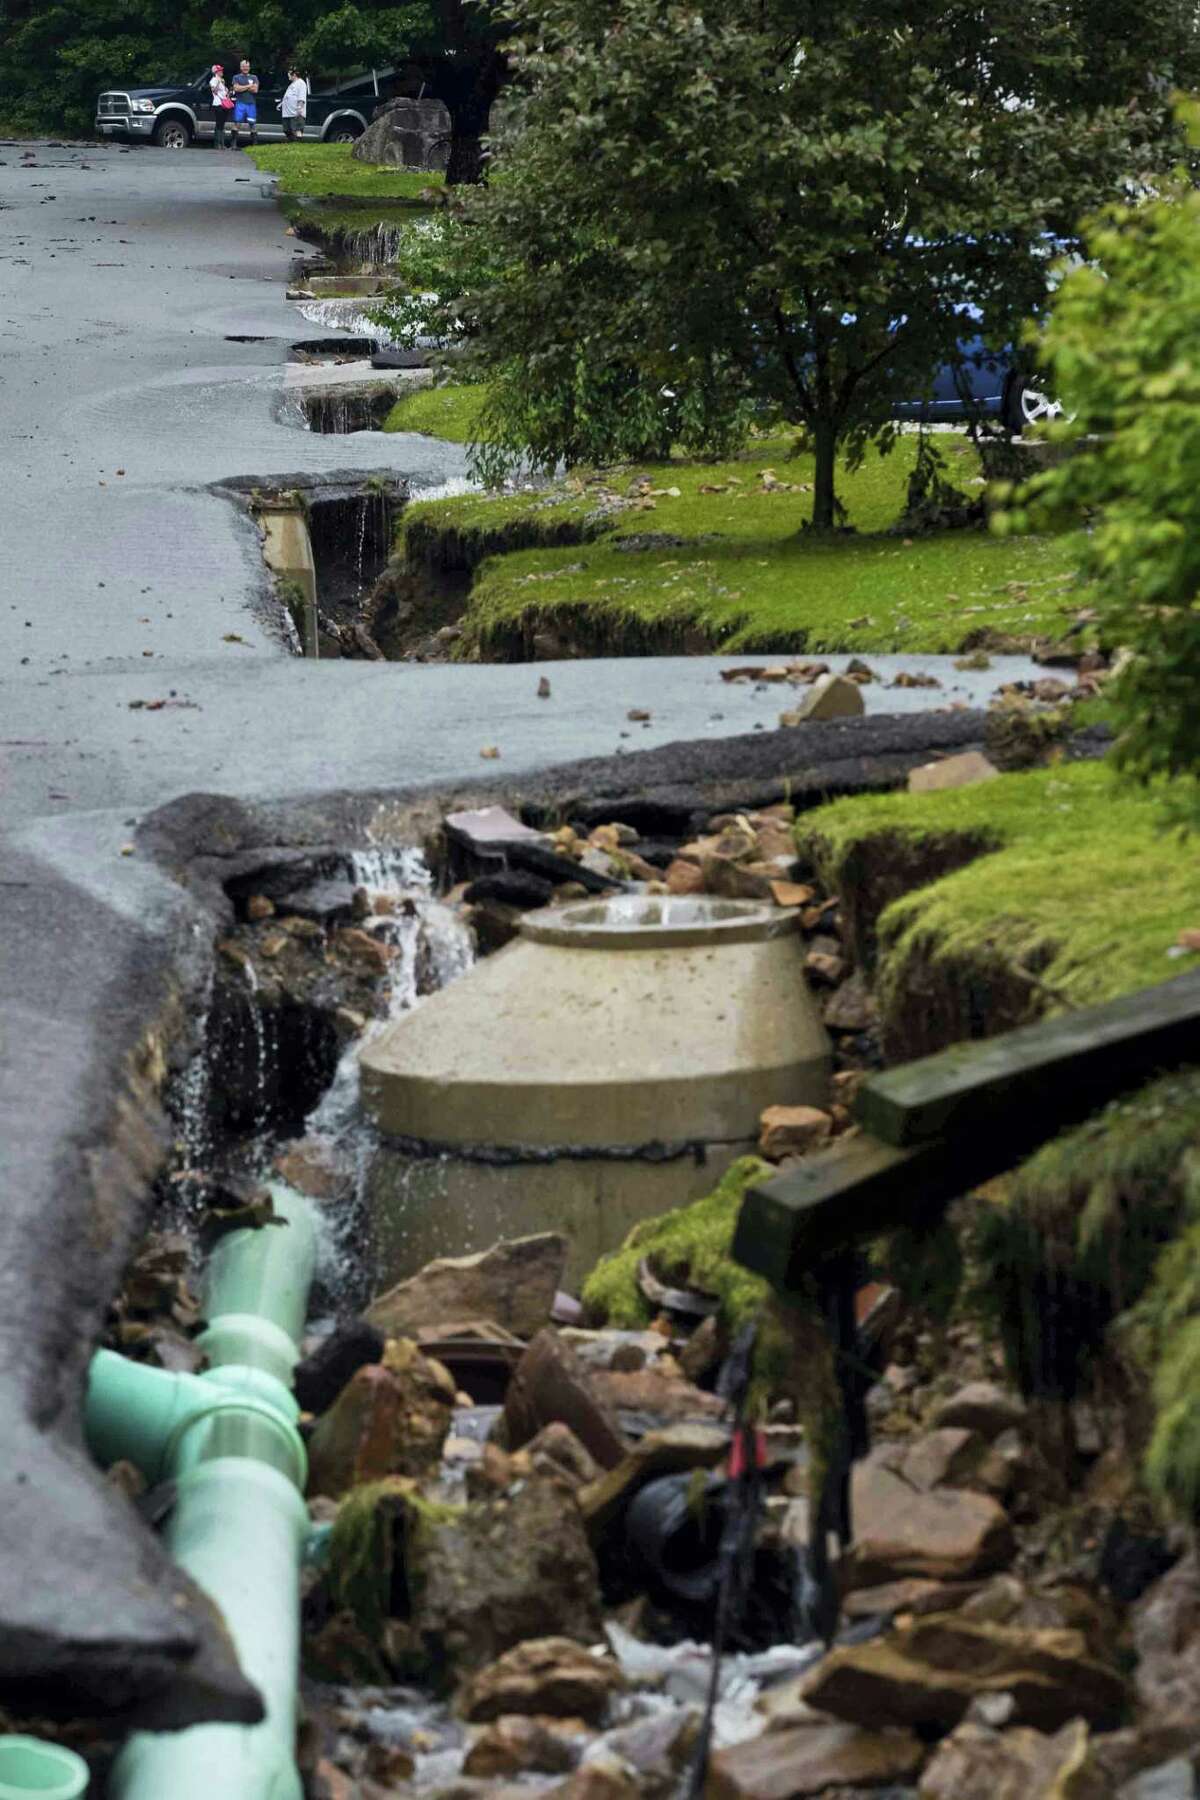 Exposed piping of city water and sewers systems lay bare after being exposed by the removal of front lawns and large portions of asphalt along Oakford Avenue by severe flood waters in Richwood, W.Va. on Friday.